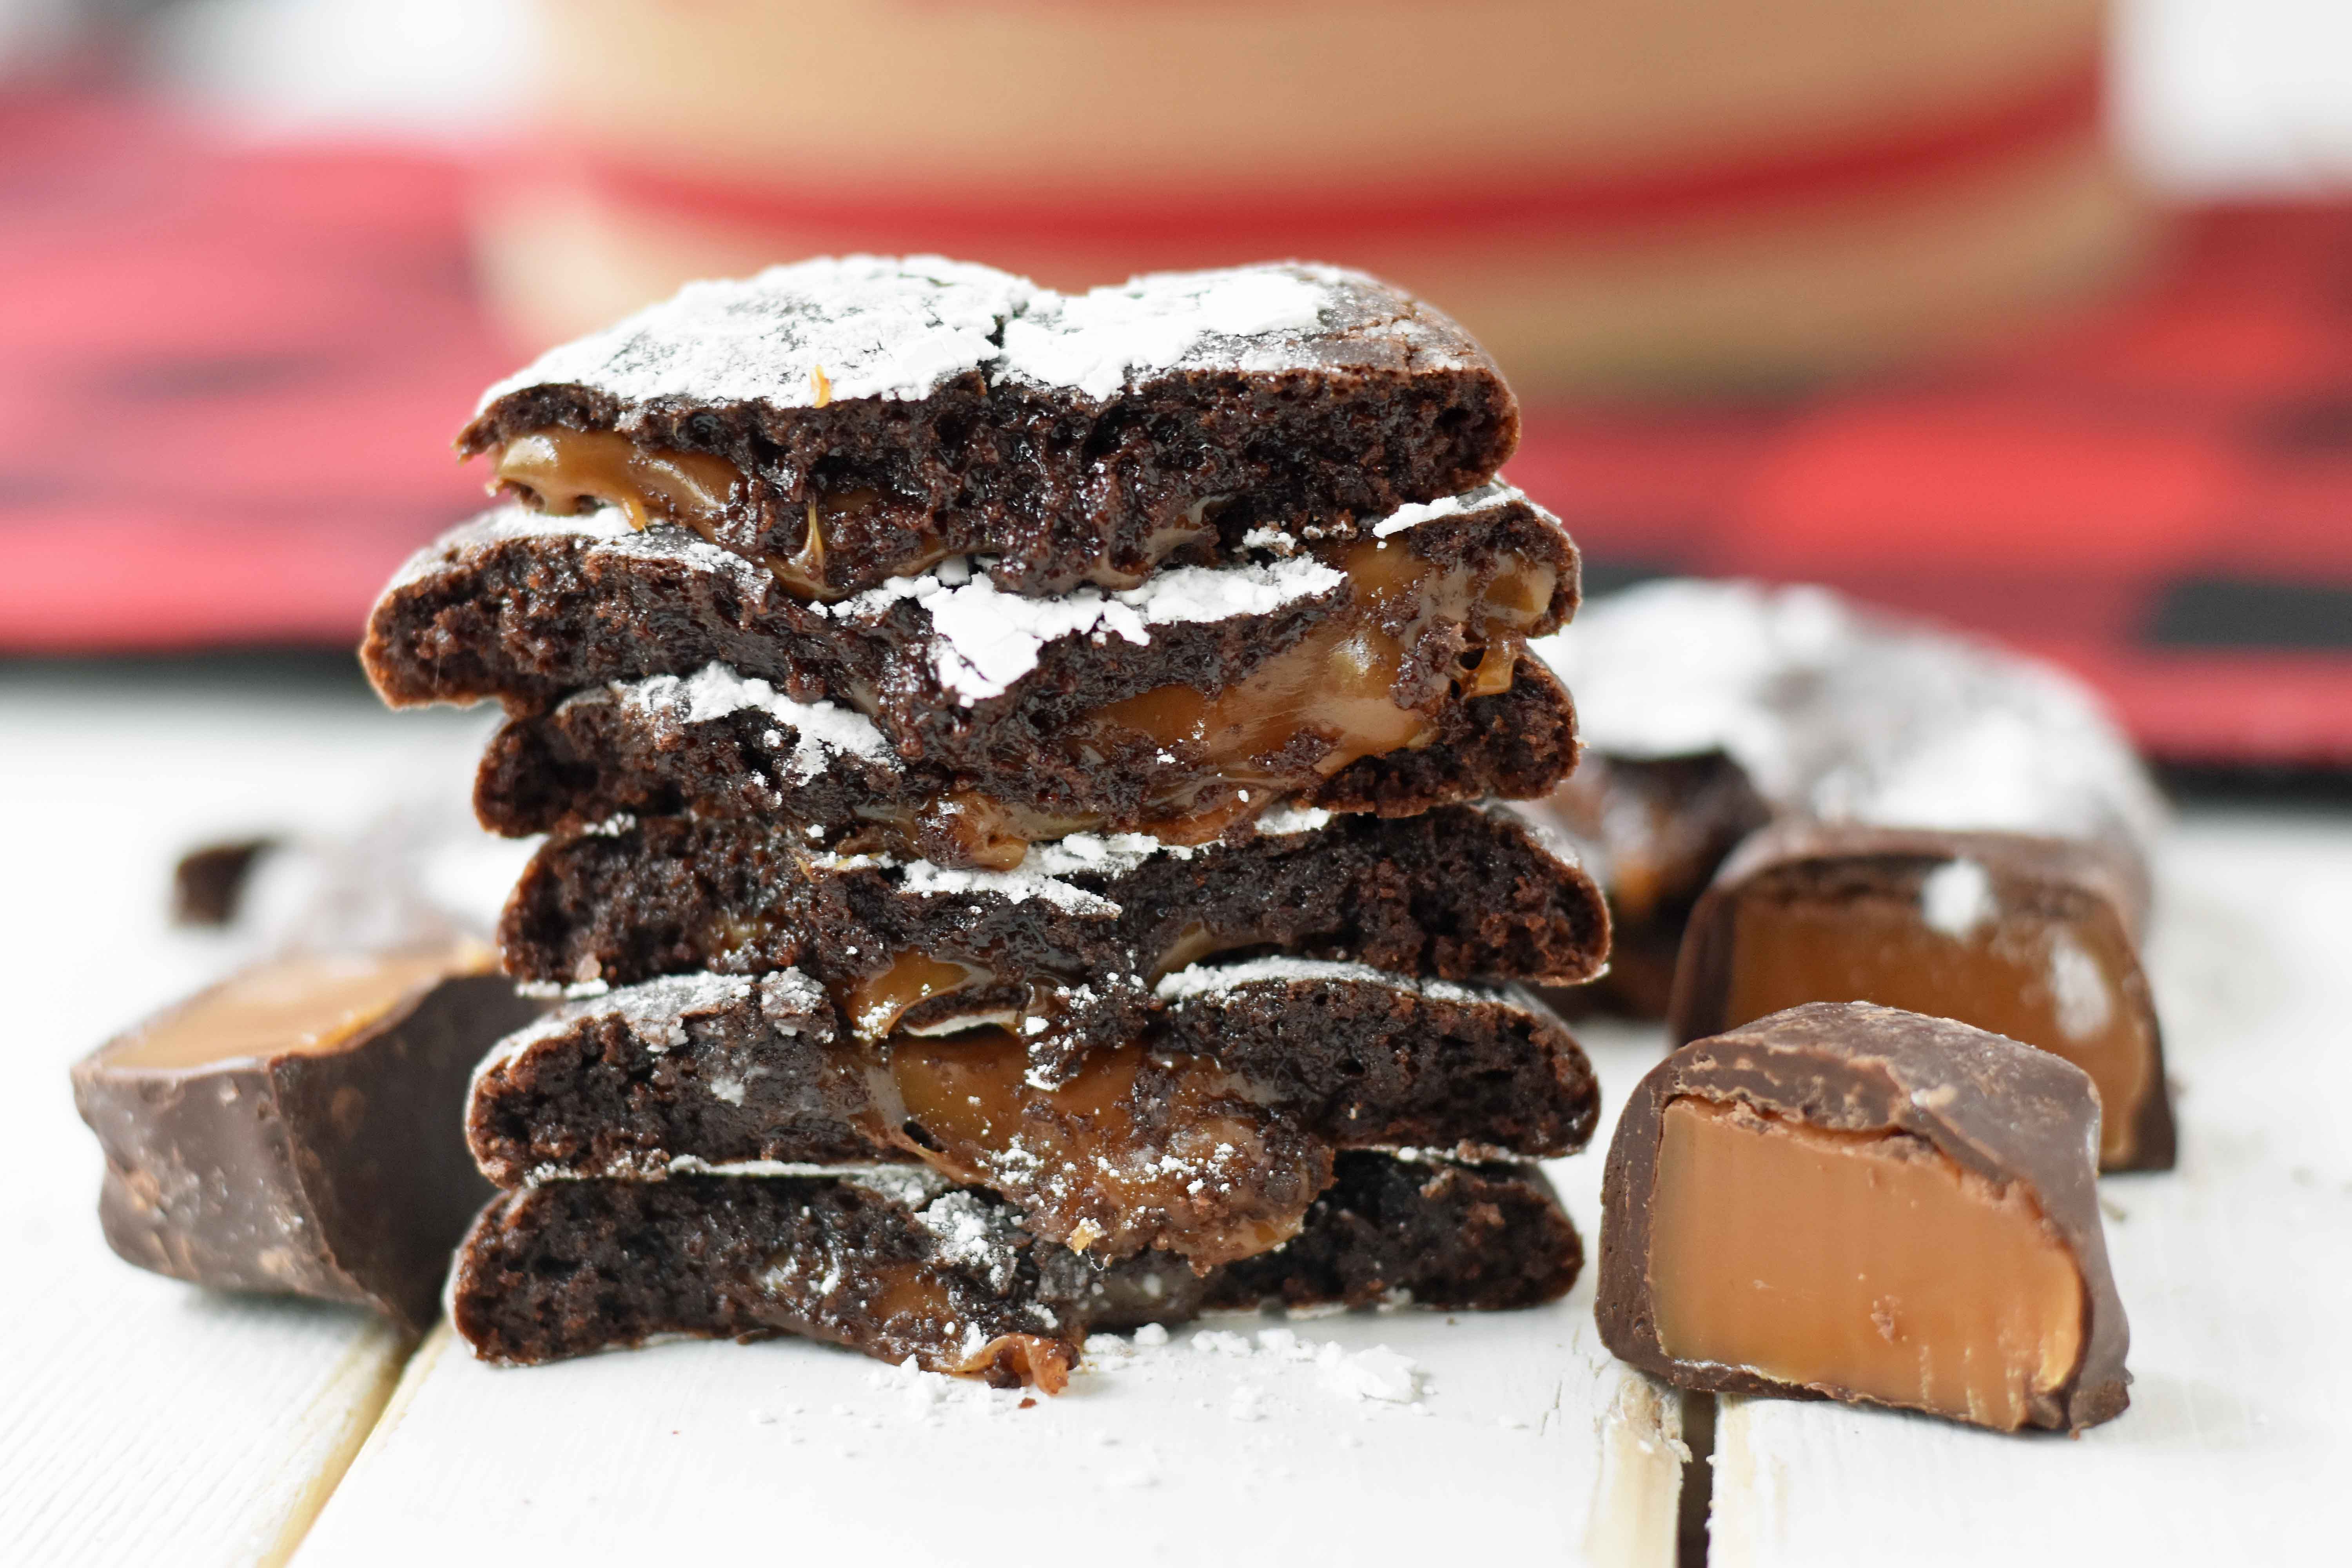 Caramel Filled Chocolate Crinkle Cookies. Soft chewy chocolate cookies with soft caramel center and roll into powdered sugar. A popular chocolate caramel filled cookie. www.modernhoney.com